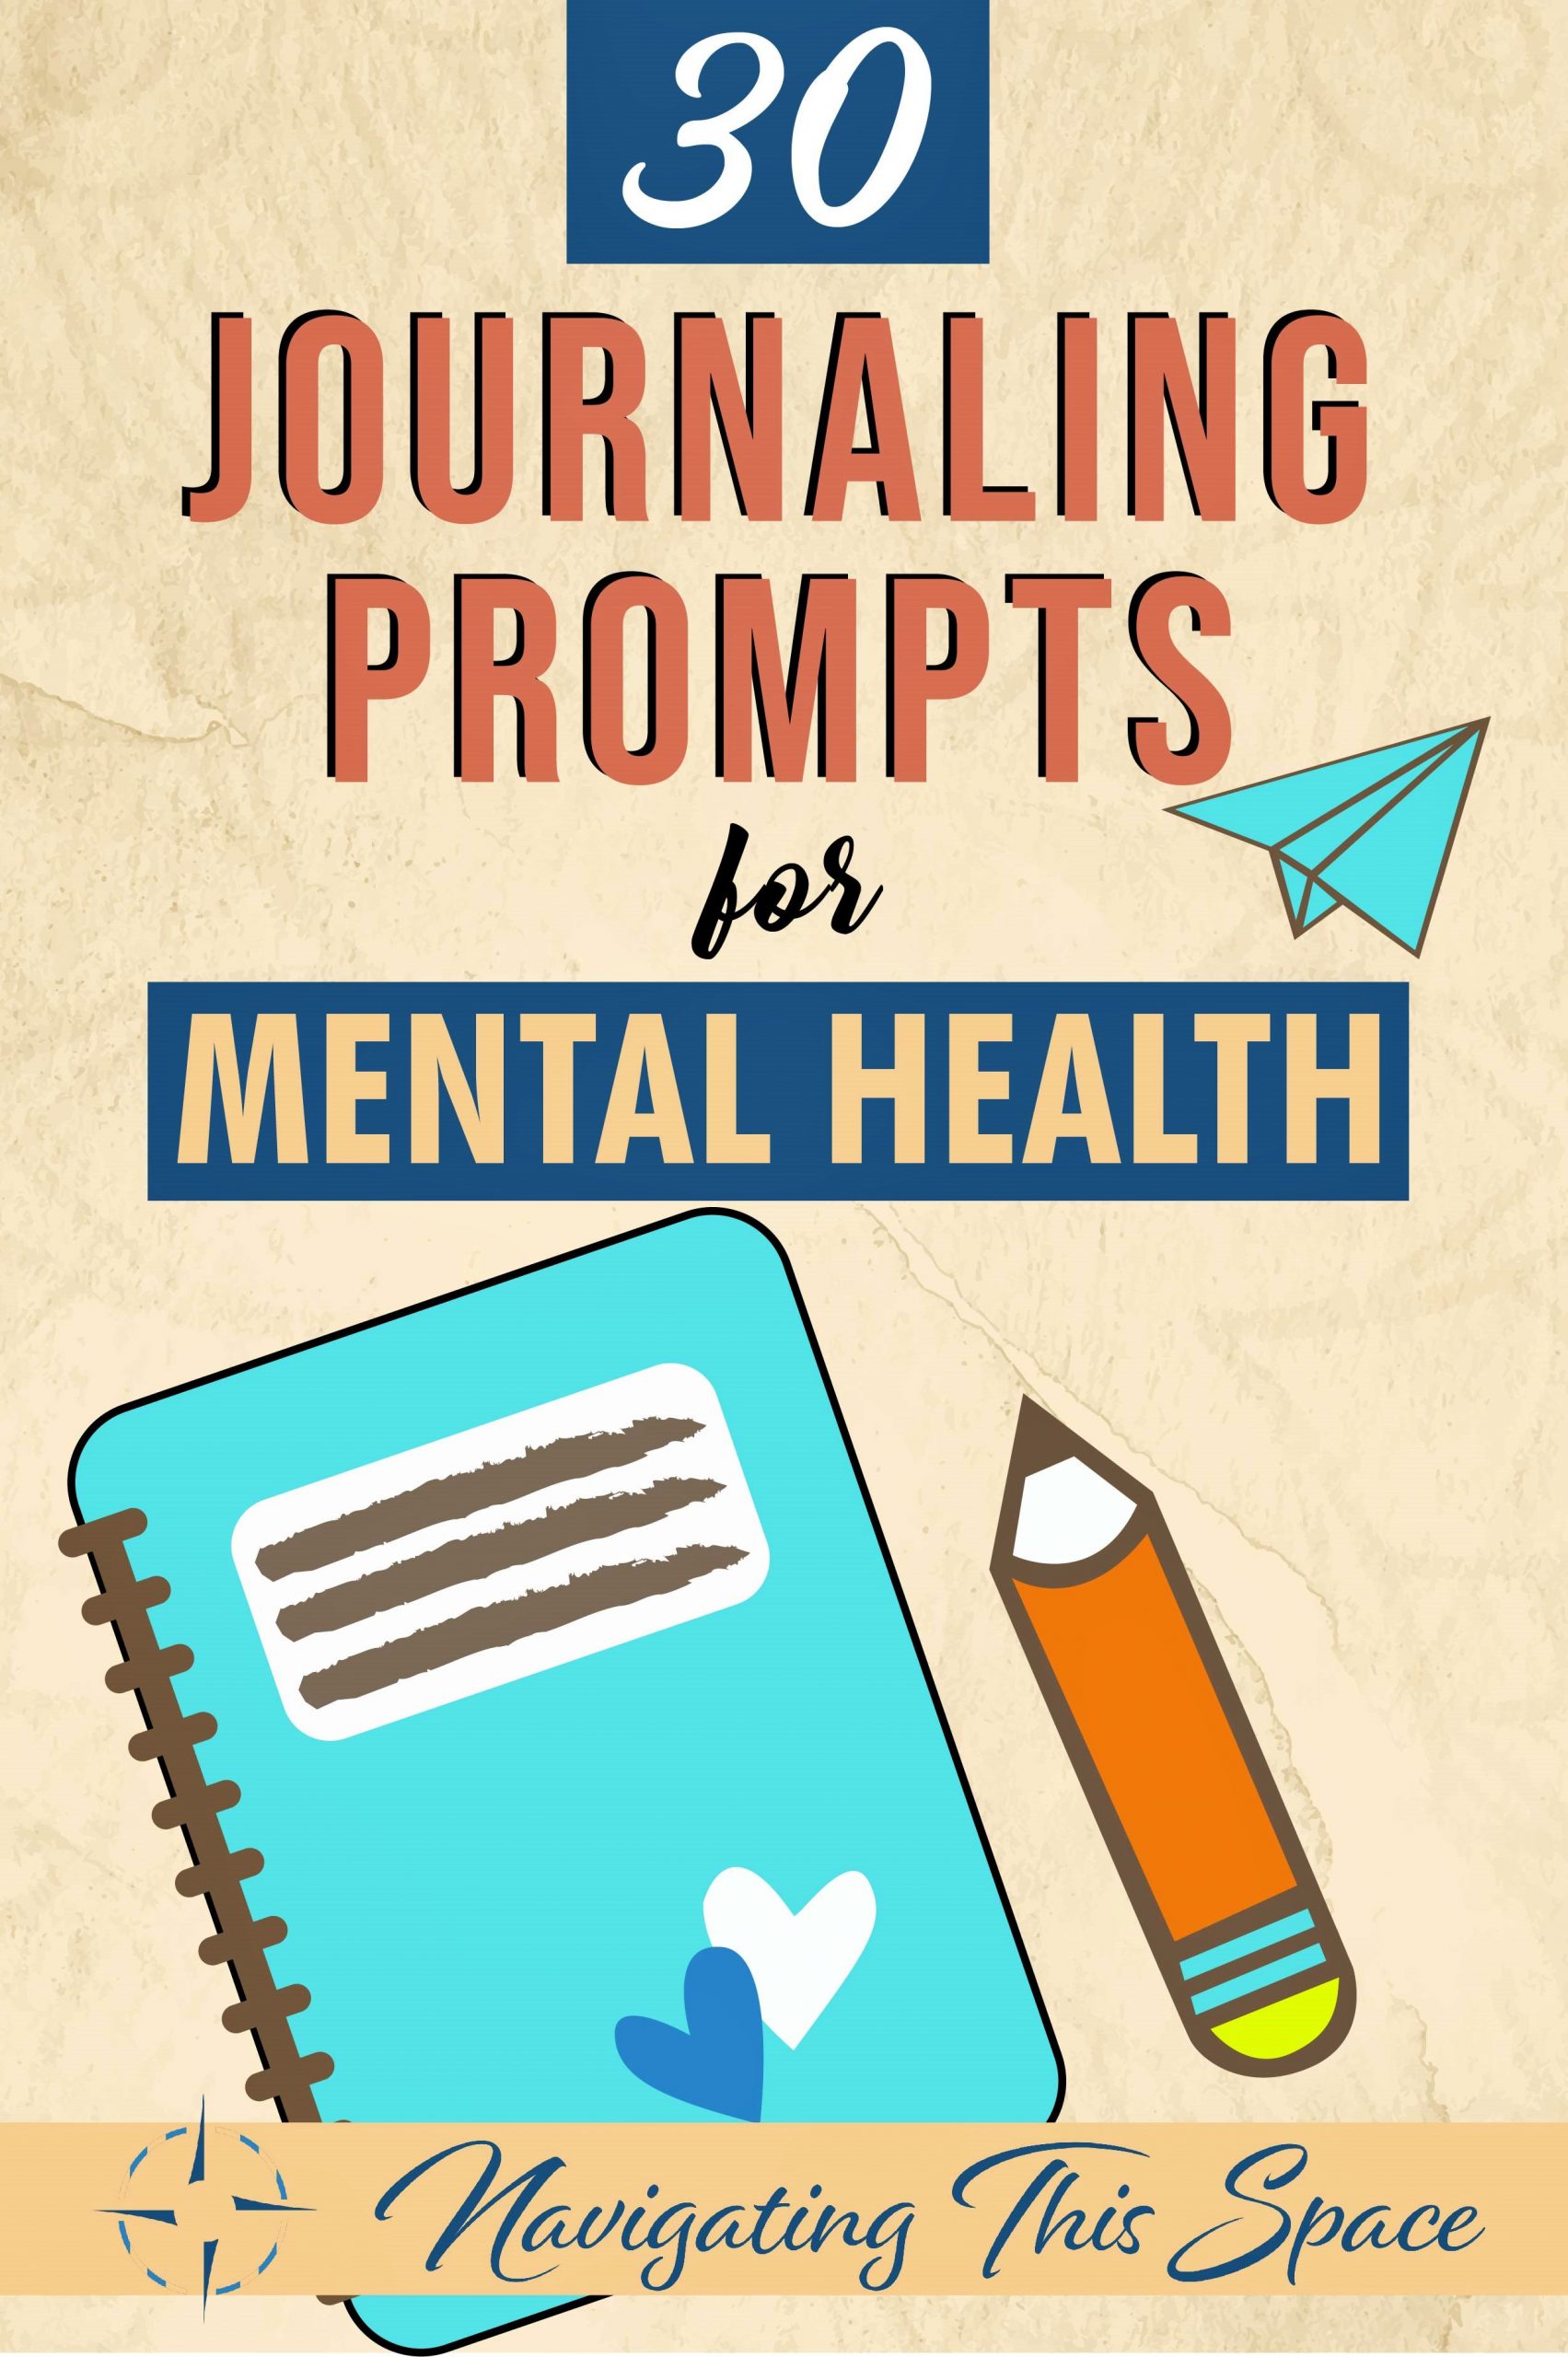 30 Journaling prompts for mental health